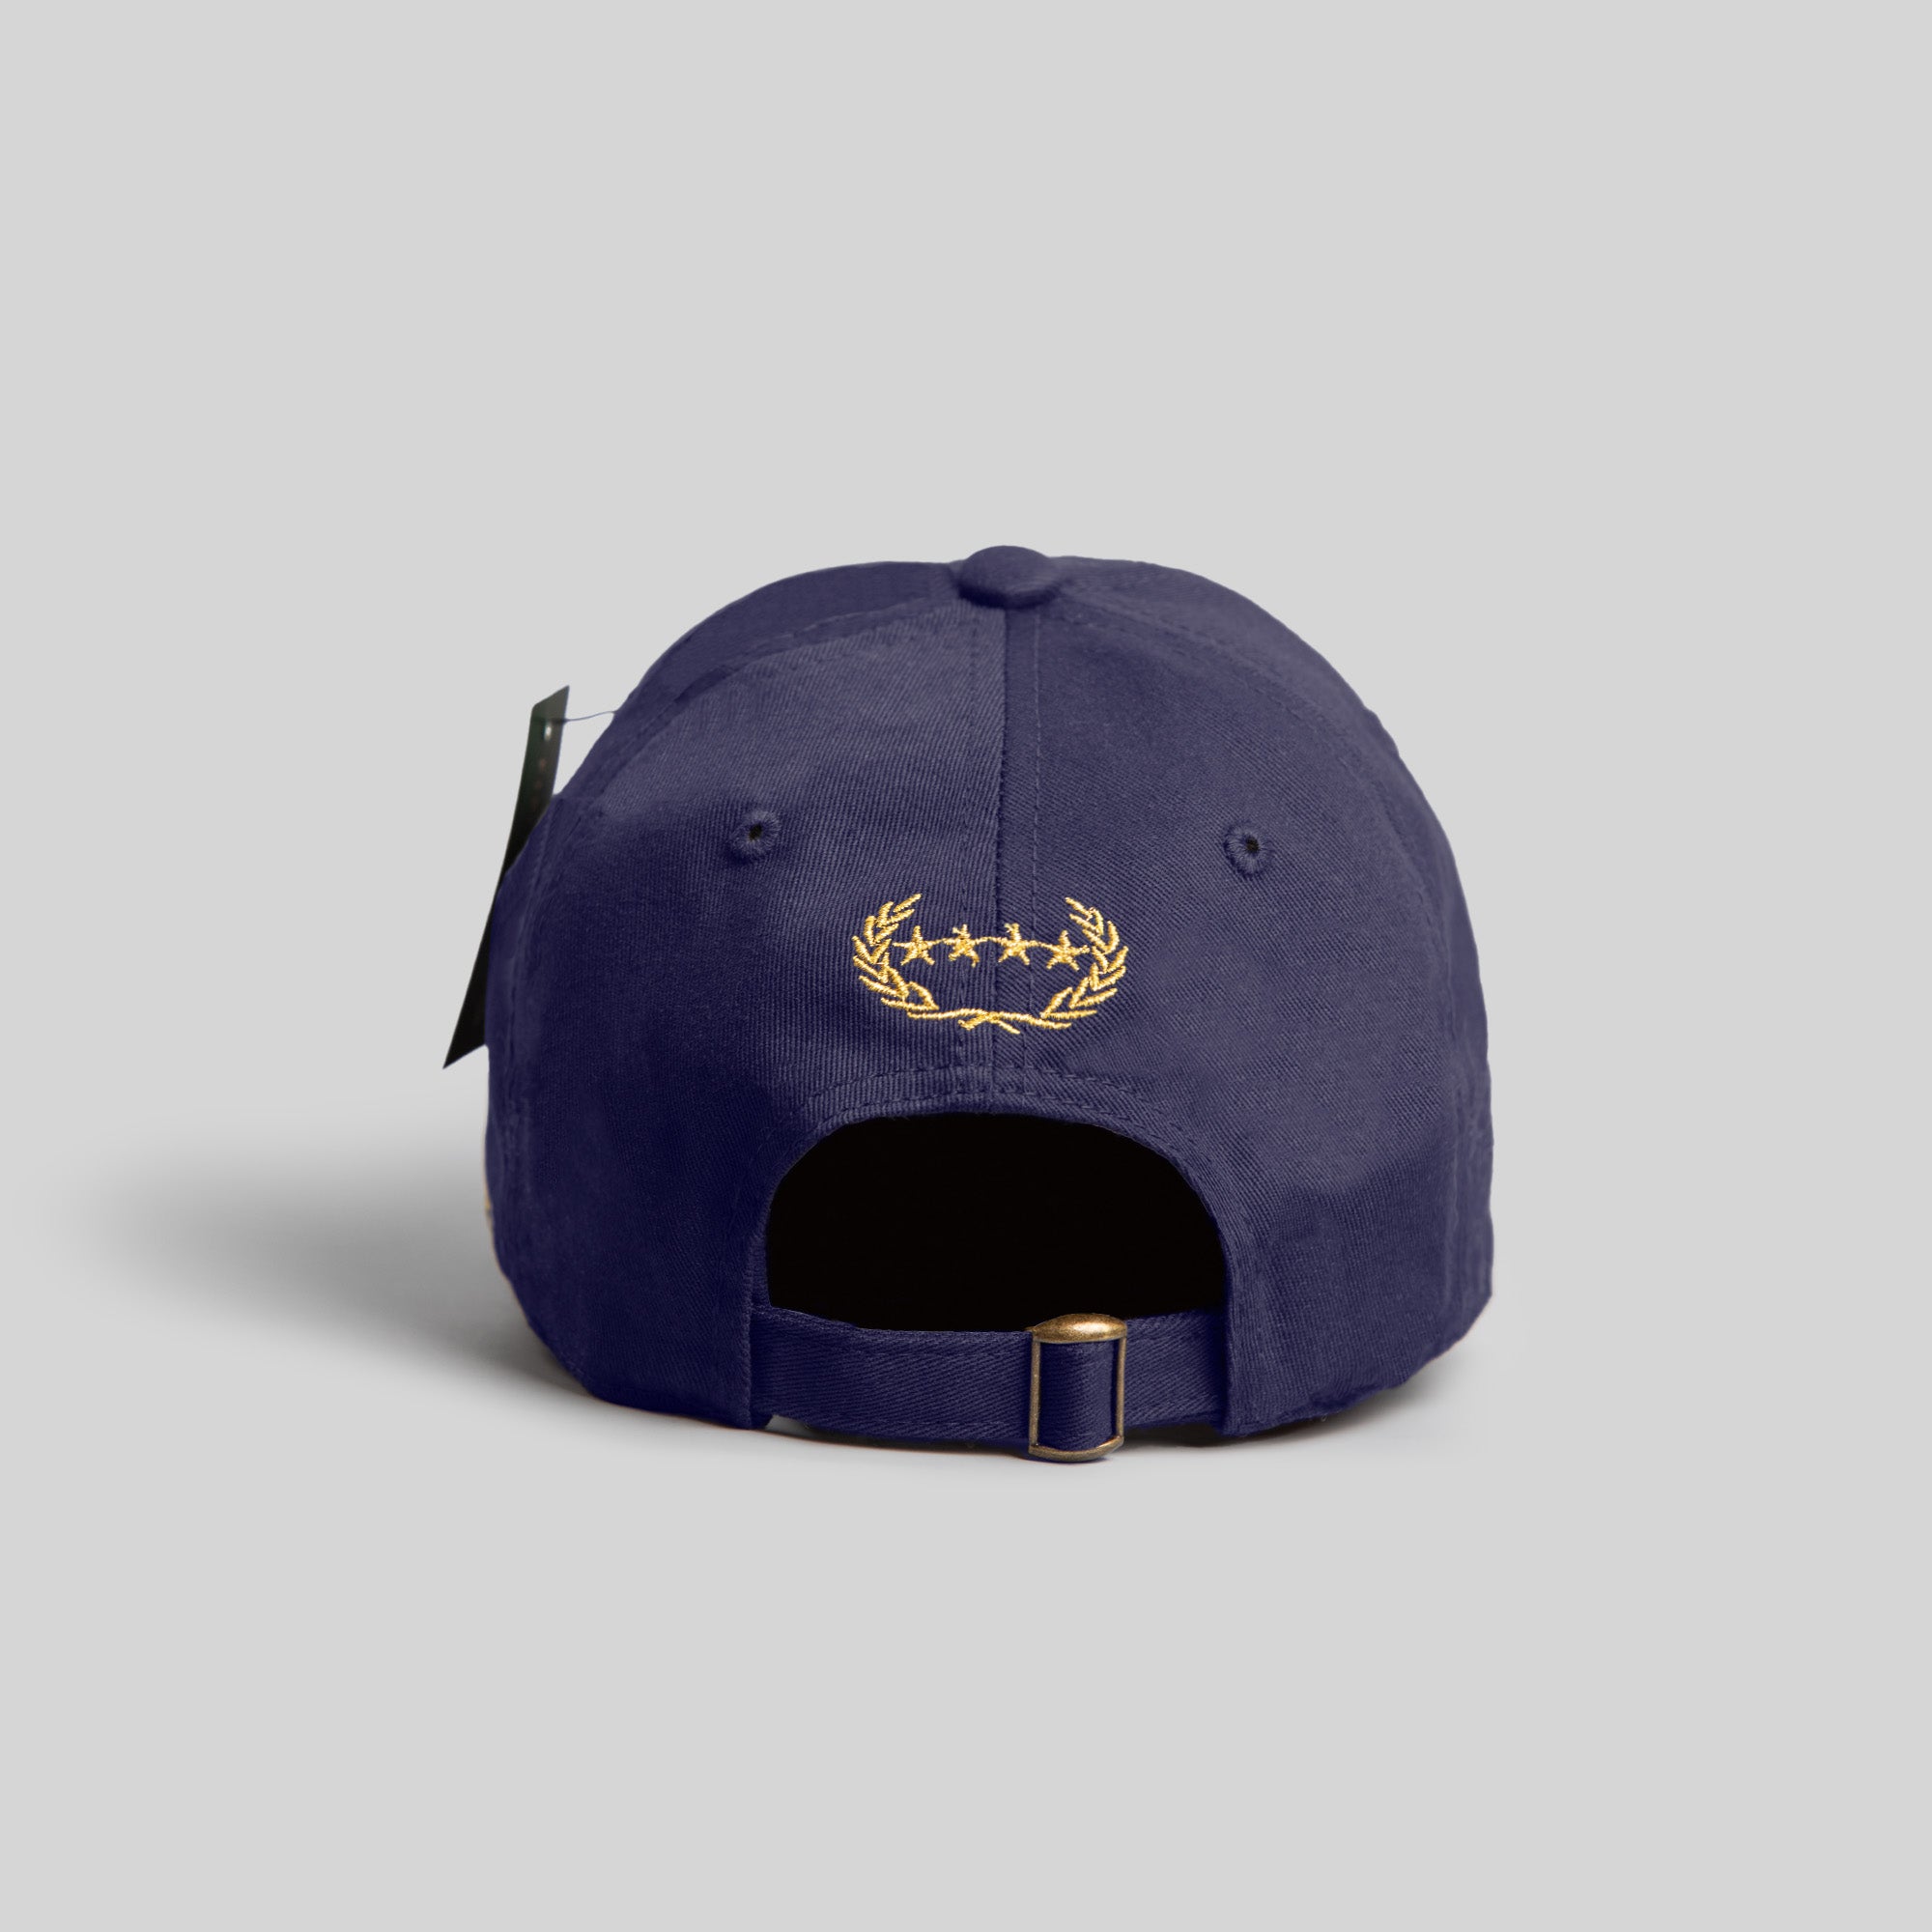 ROYALTY DEEP NAVY DISTRESSED RELAXED FIT HAT